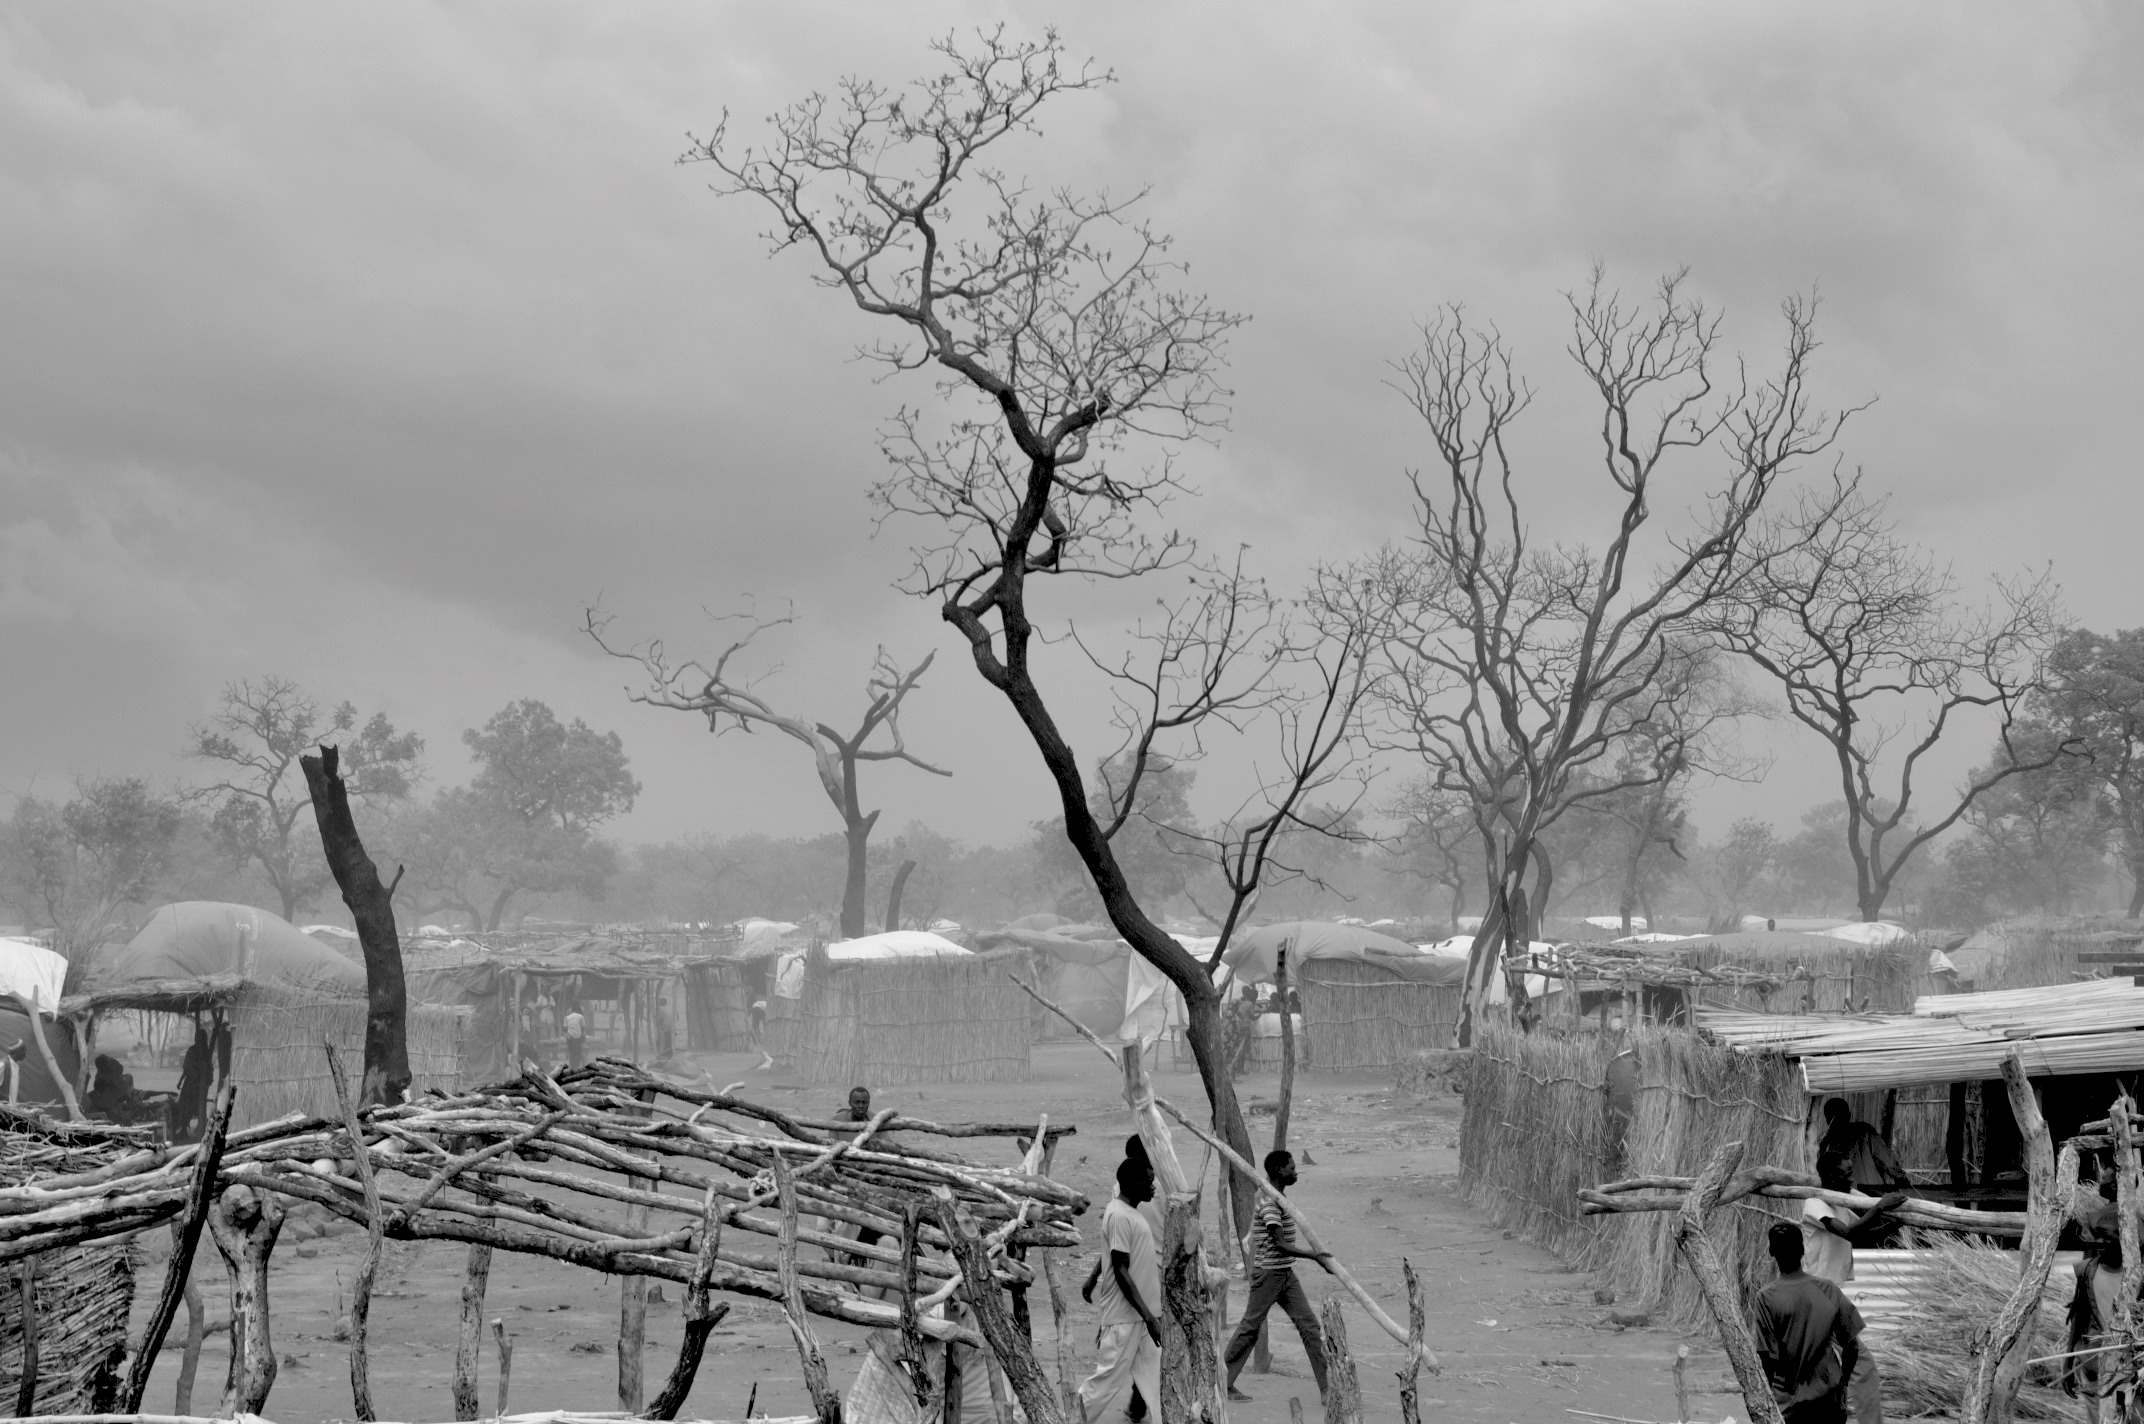 It is about to rain in Yida, South Sudan’s largest refugee camp, 2014. Photo by Jérôme Tubiana.